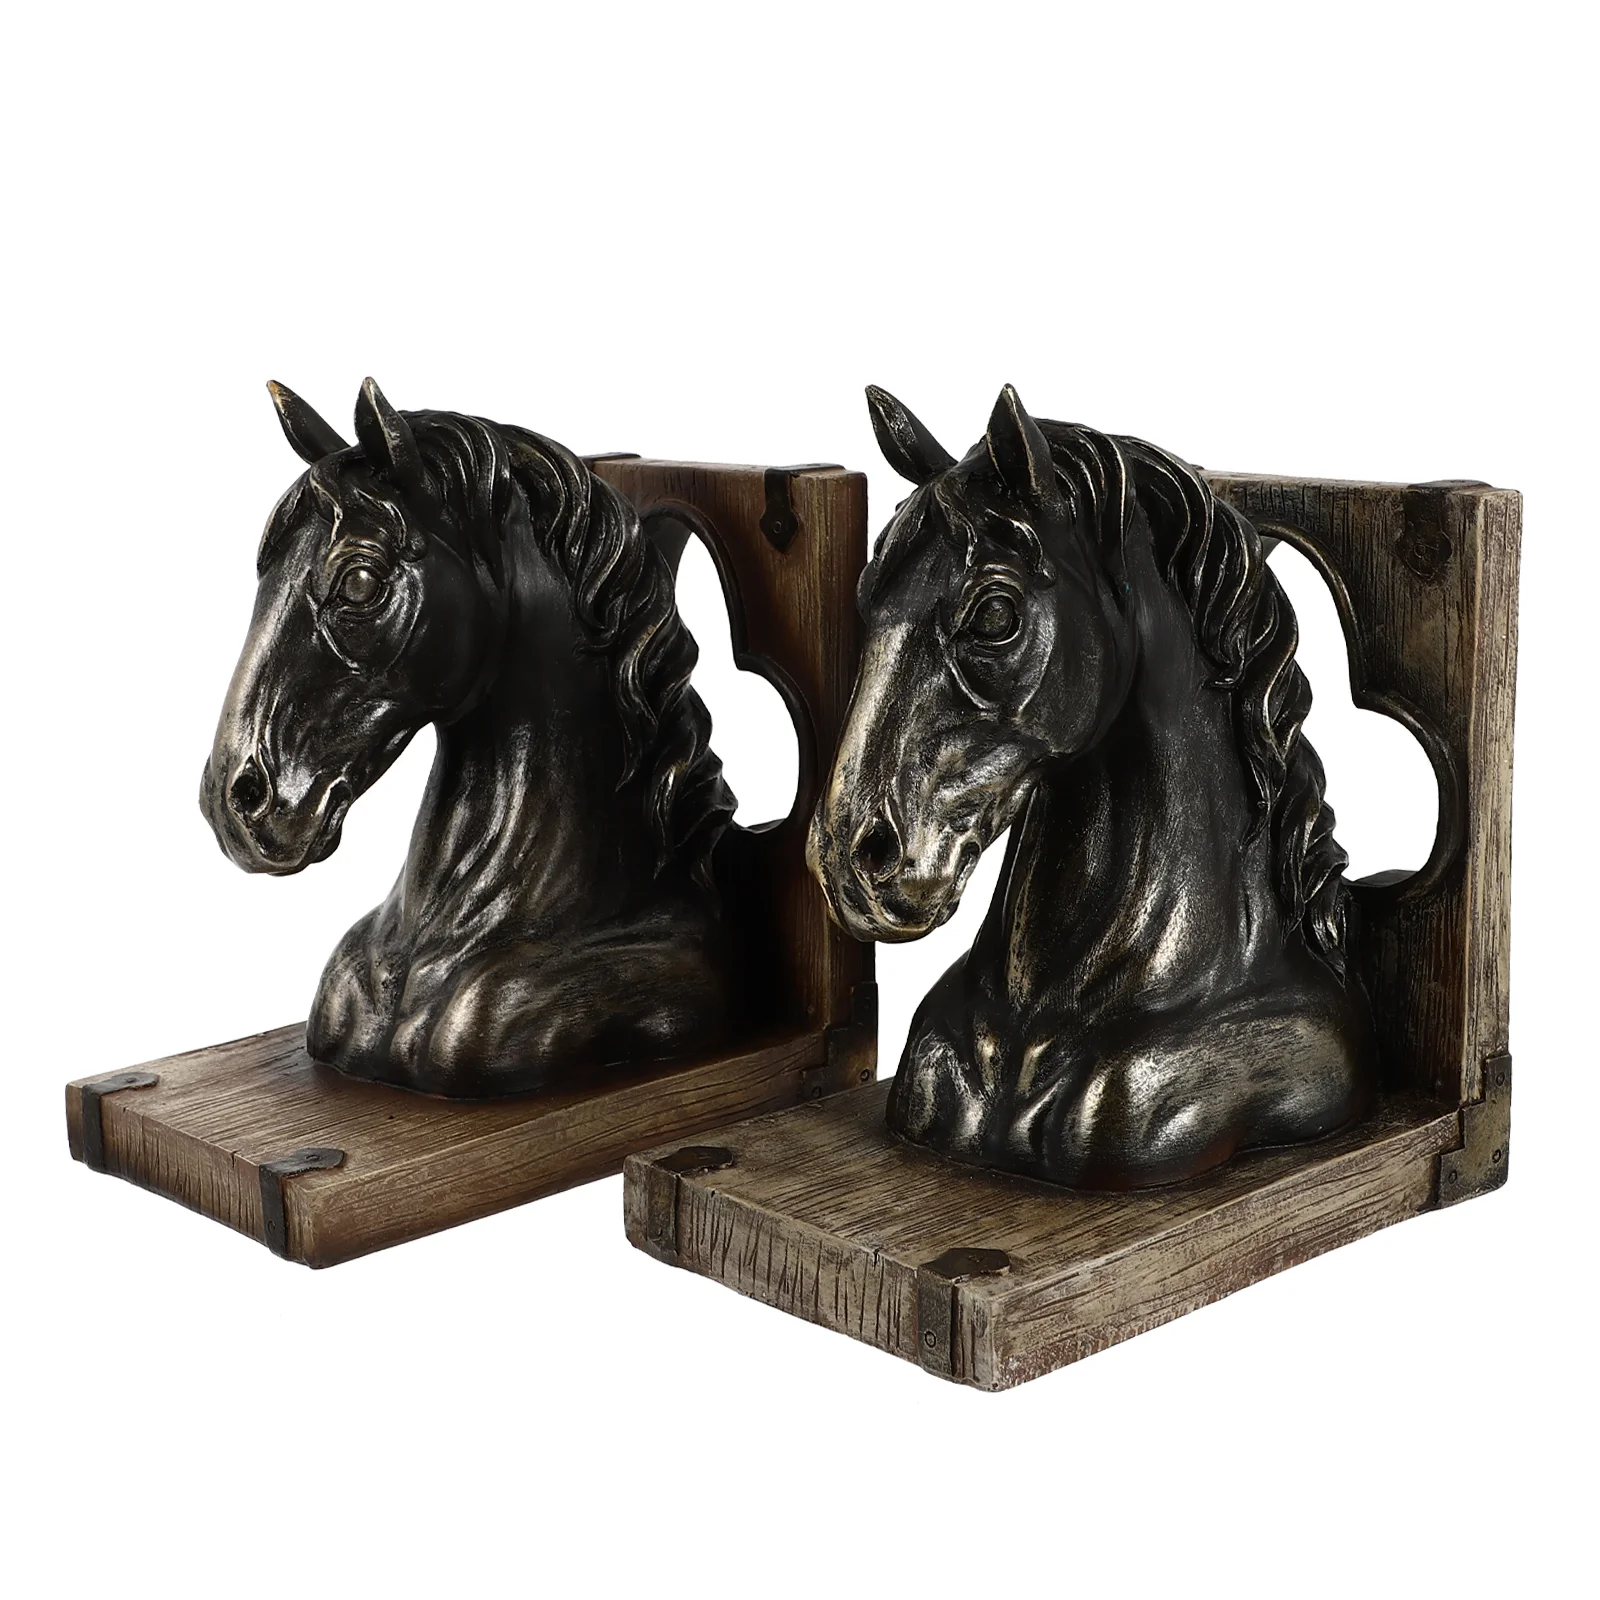 

Horse Head Bookend Ornament Resin Study Fixator Household Bookshelf Fitting Desktop Bookcase Accessory Retro Style Office Ends